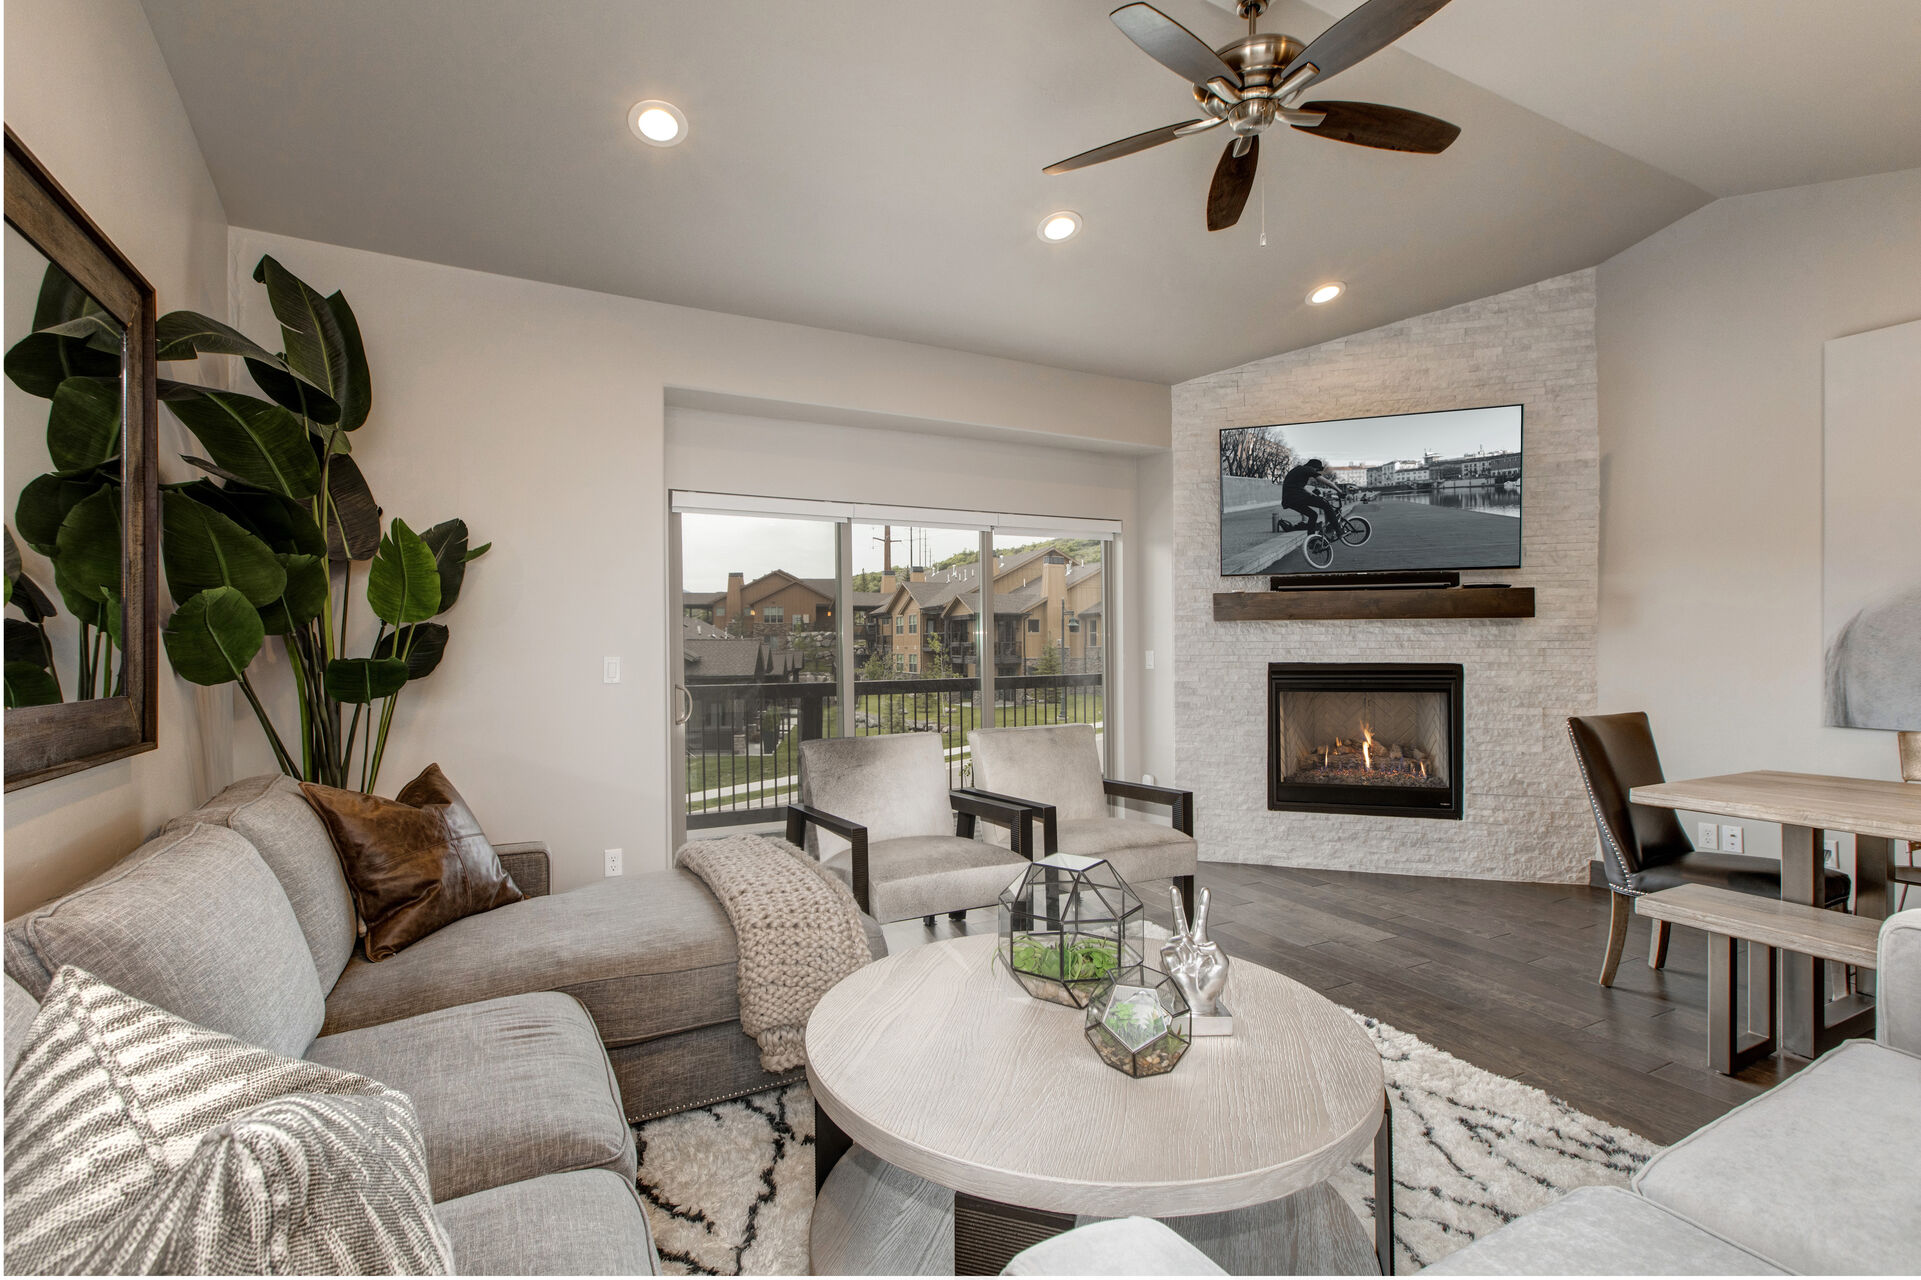 Cozy Space with a Gas Fireplace, a 65